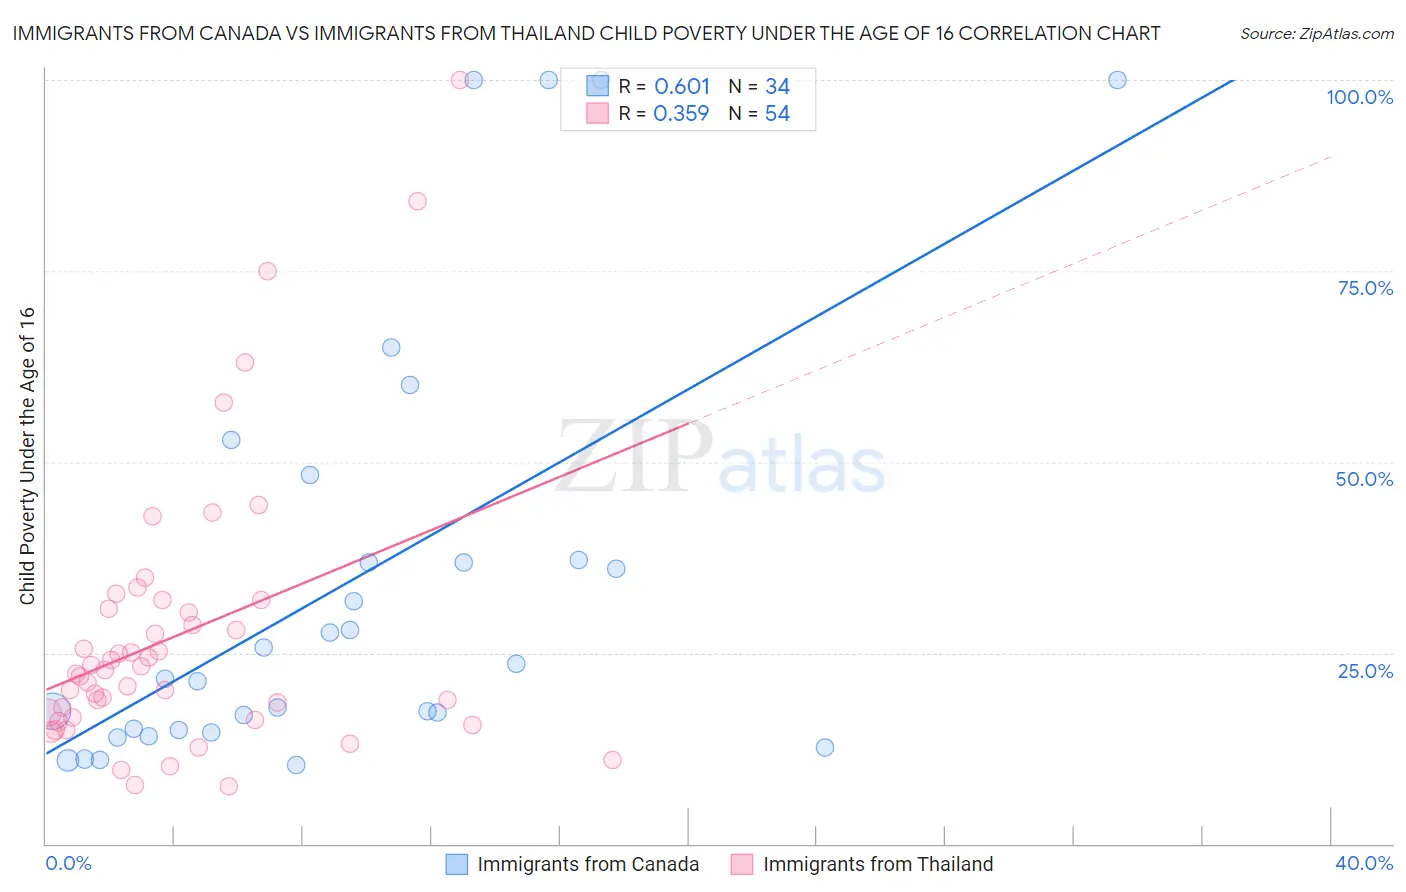 Immigrants from Canada vs Immigrants from Thailand Child Poverty Under the Age of 16